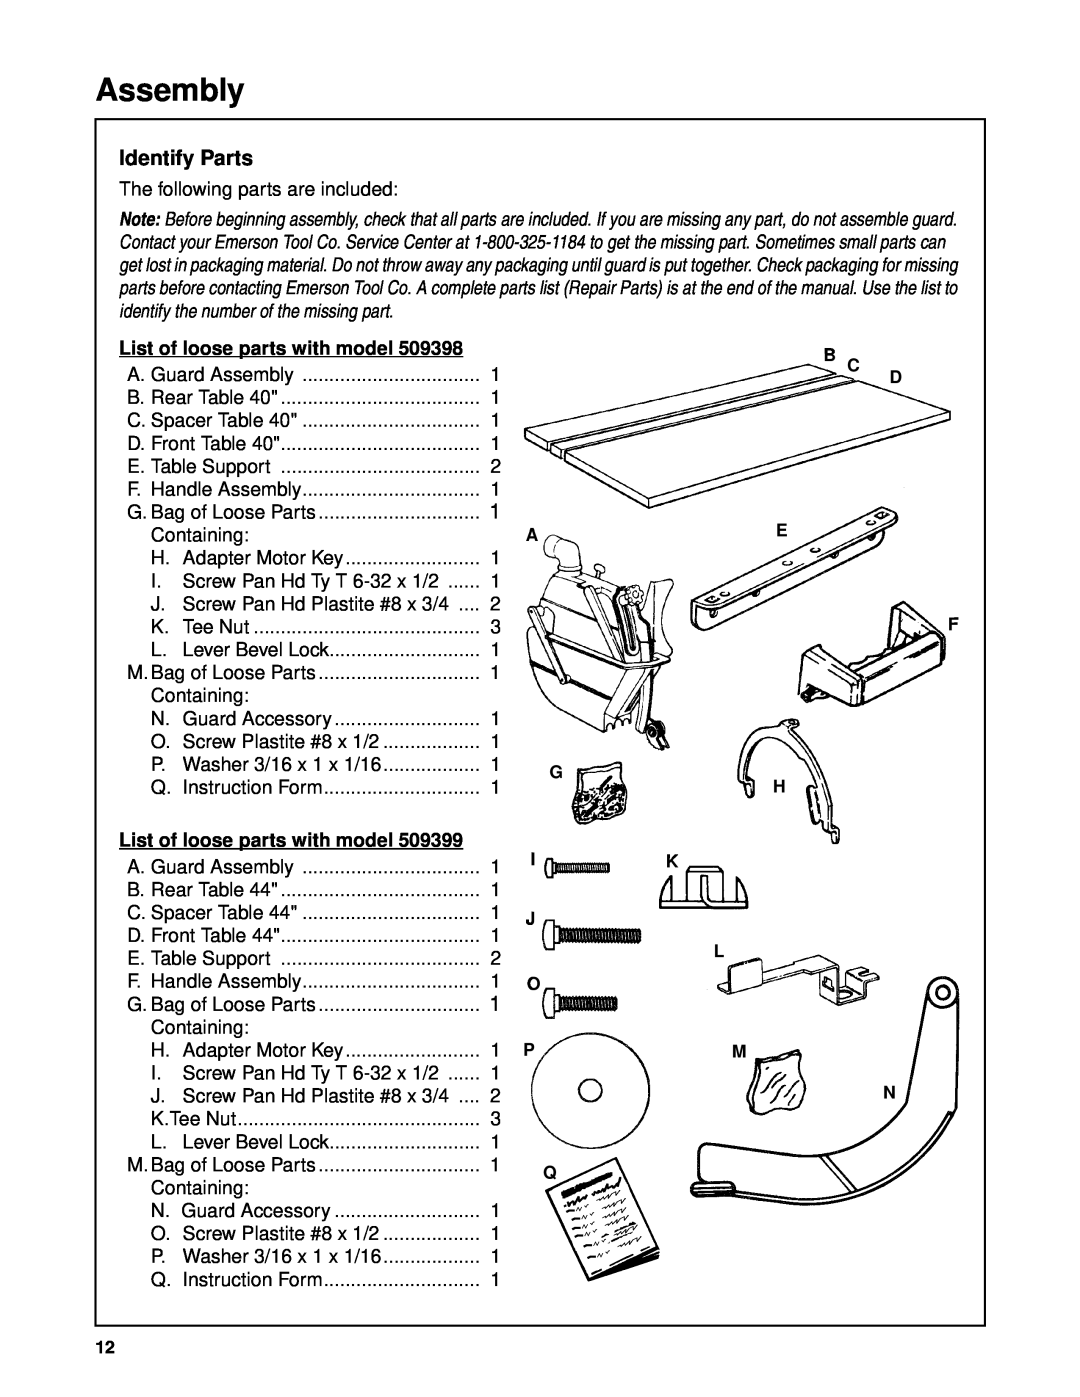 Craftsman 509399, 509398 owner manual Assembly, Identify Parts, List of loose parts with model 